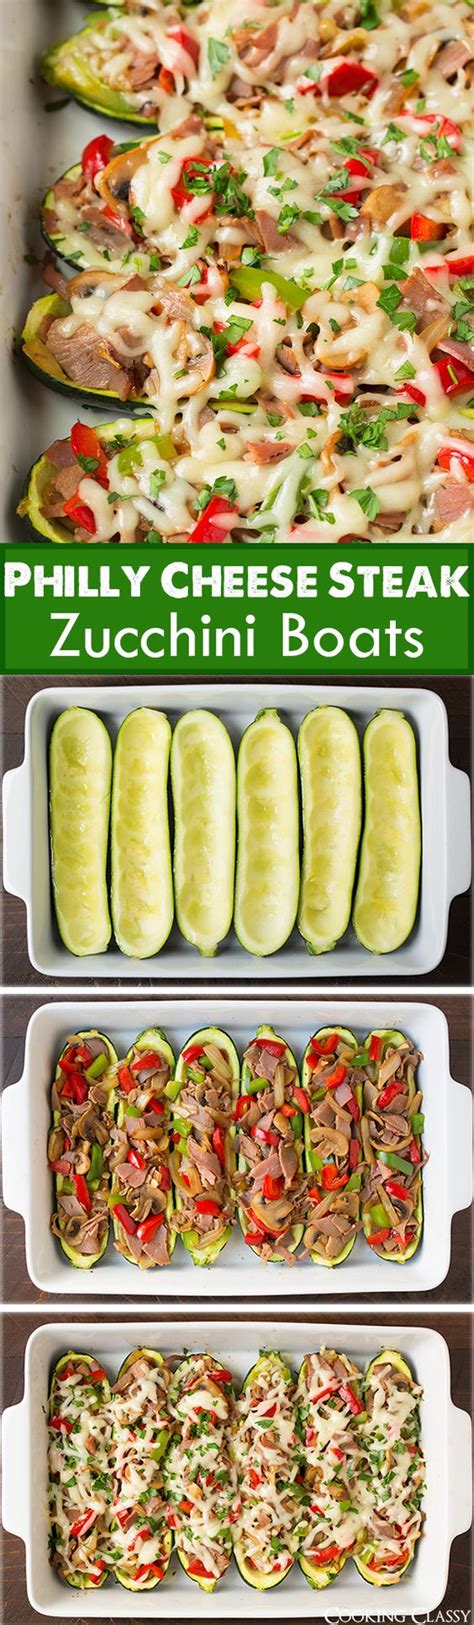 I've found my cooking mentor oh my goodness excellent excellent exellencia unbelievable easy peasy lemon. Philly Cheese Steak Zucchini Boats - a delicious low carb ...